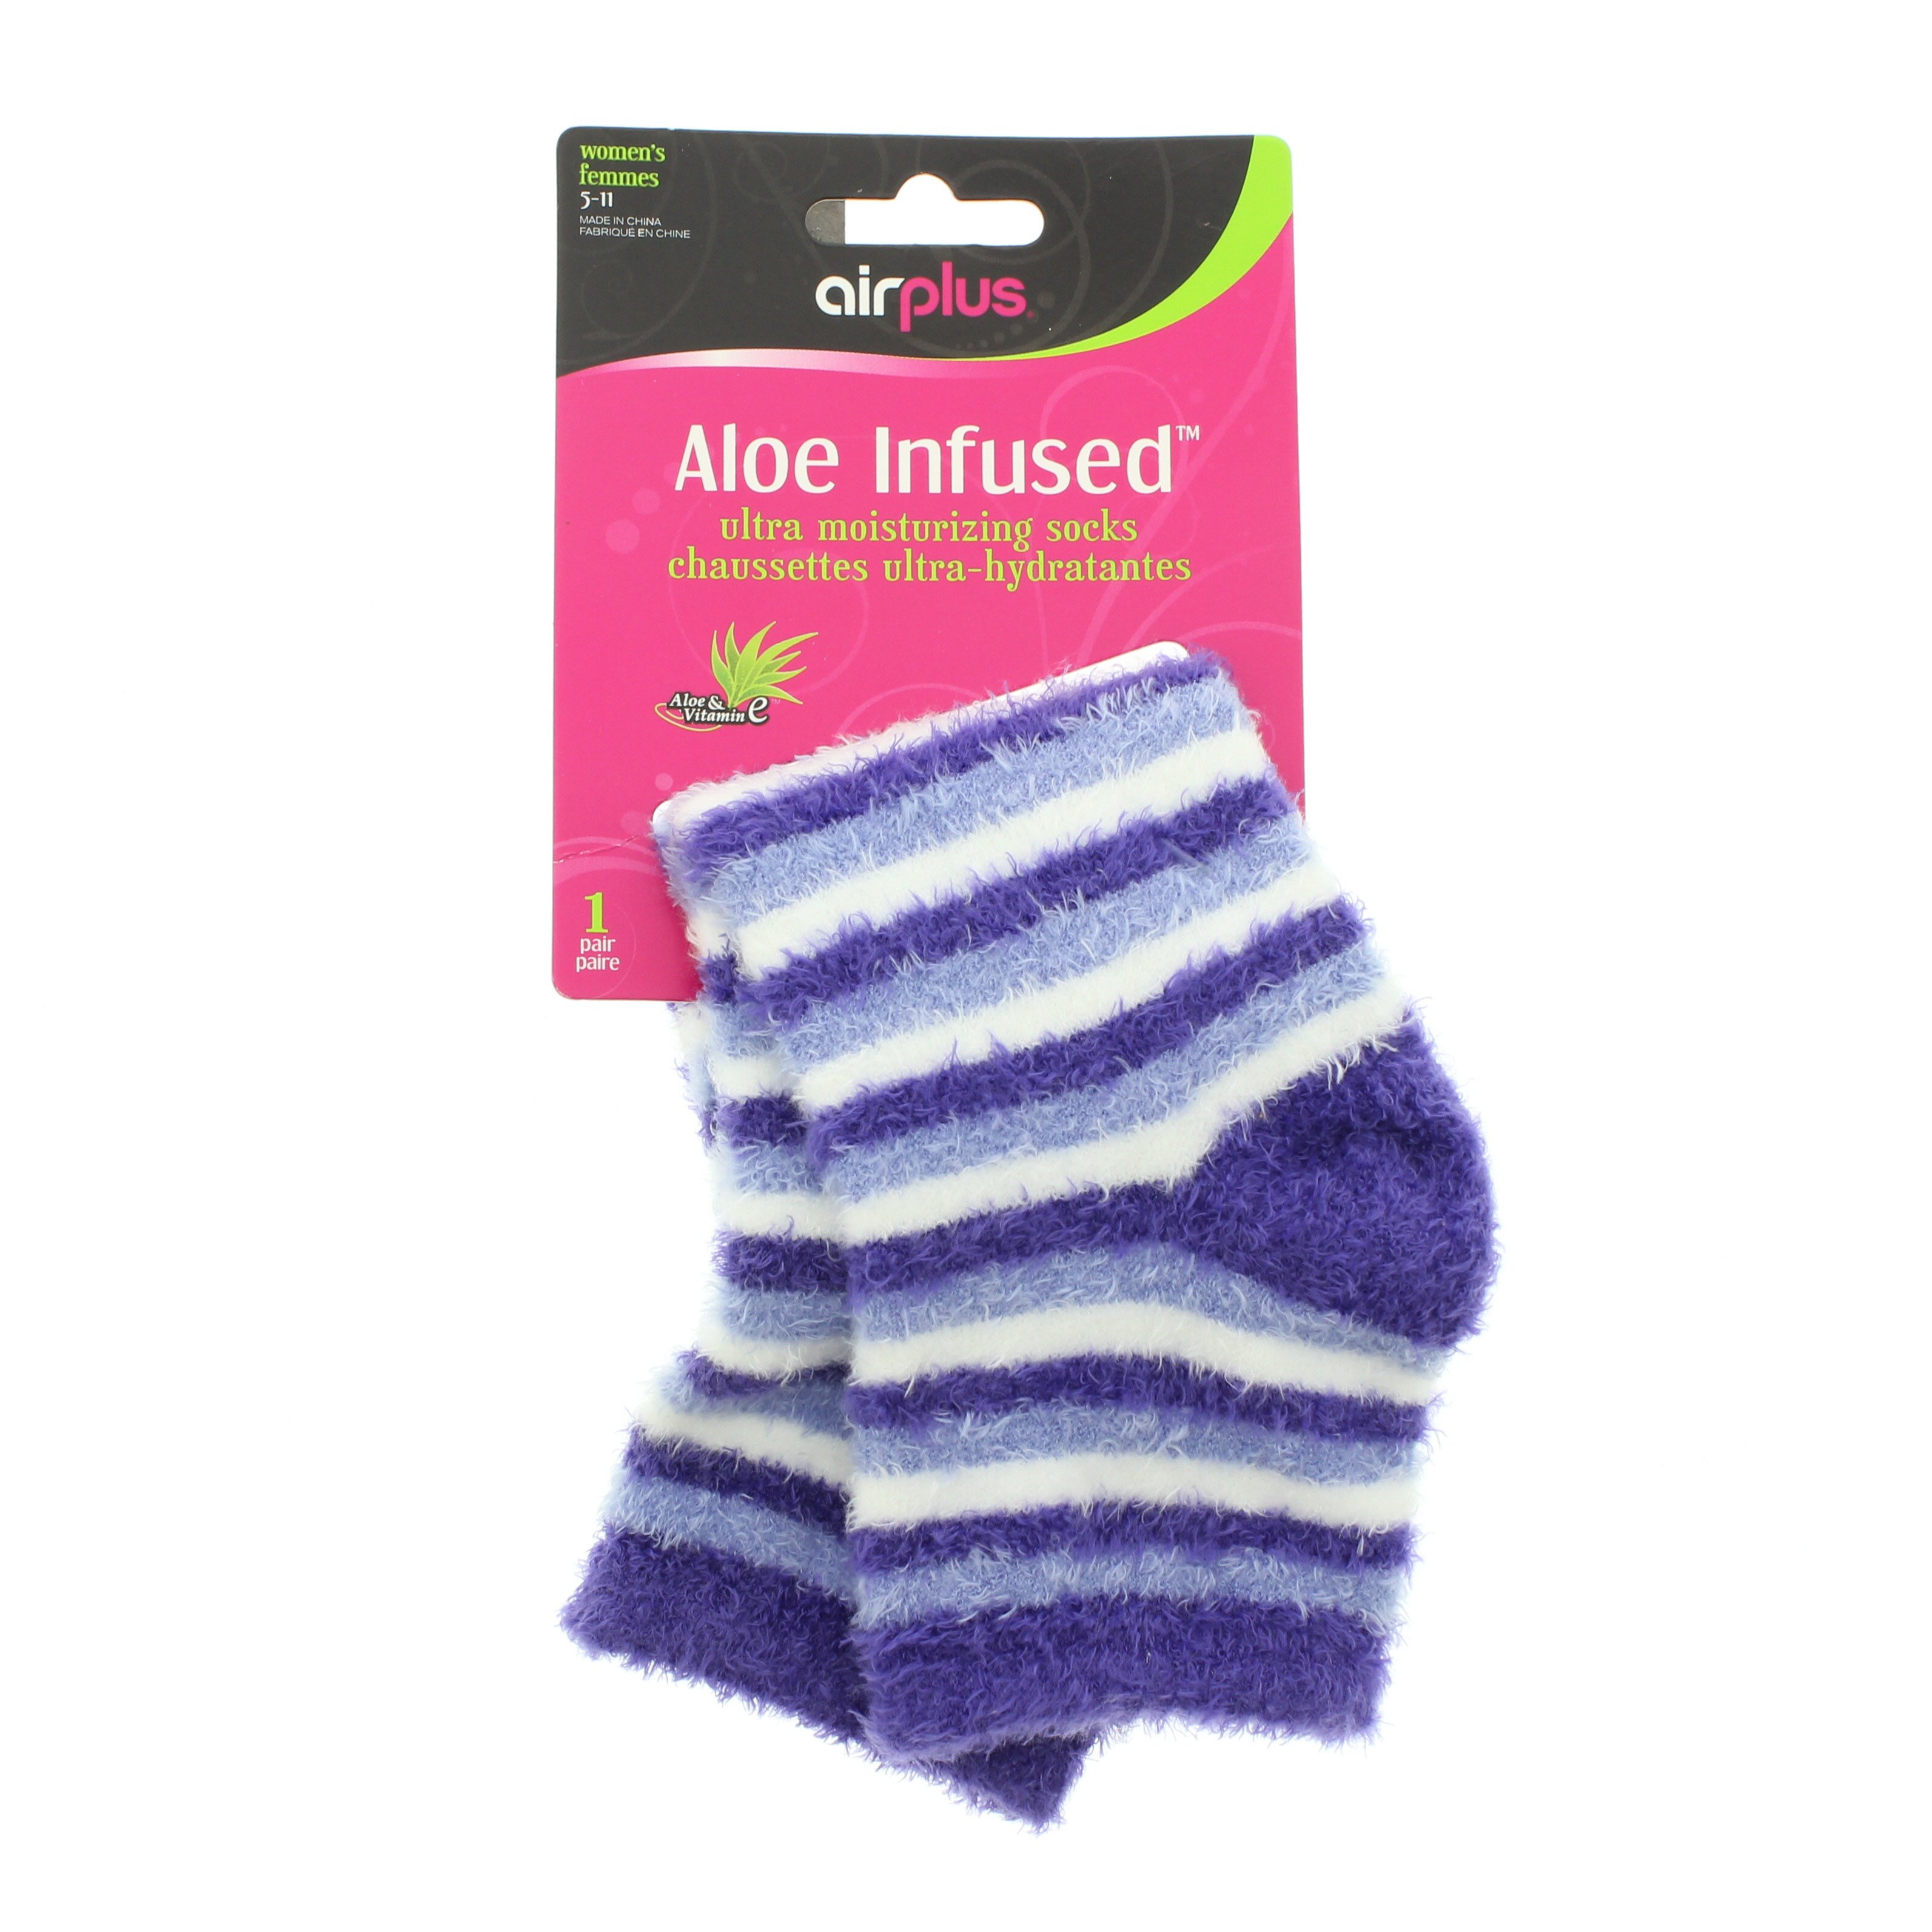 Airplus Aloe Infused Socks - Shop Clothes & Shoes at H-E-B